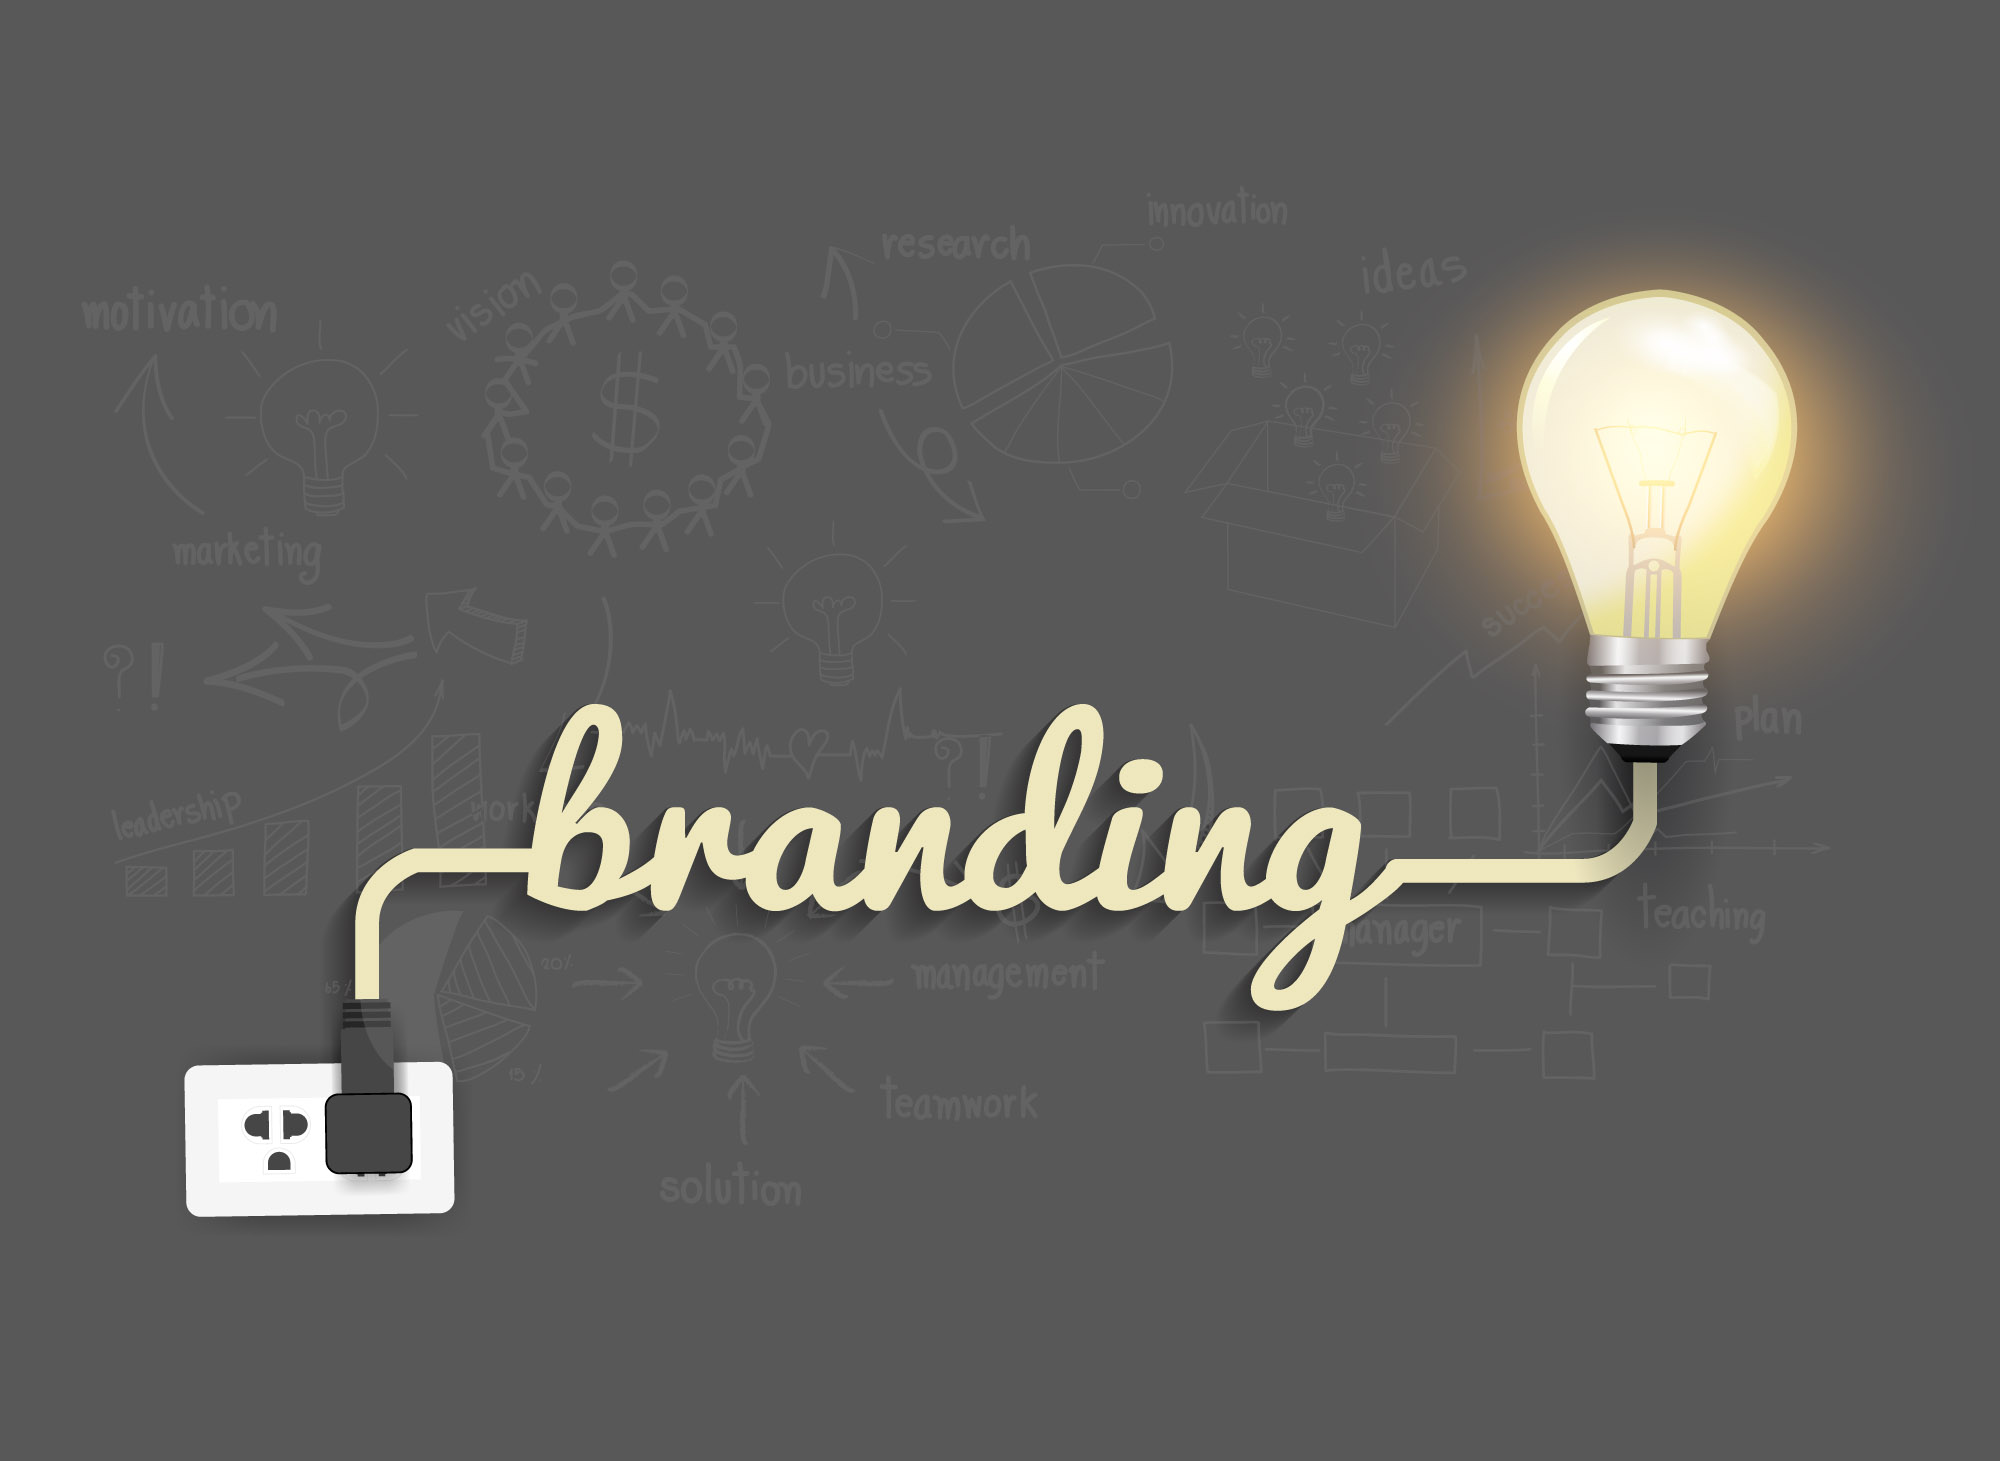 Create full professional branding to launch your business